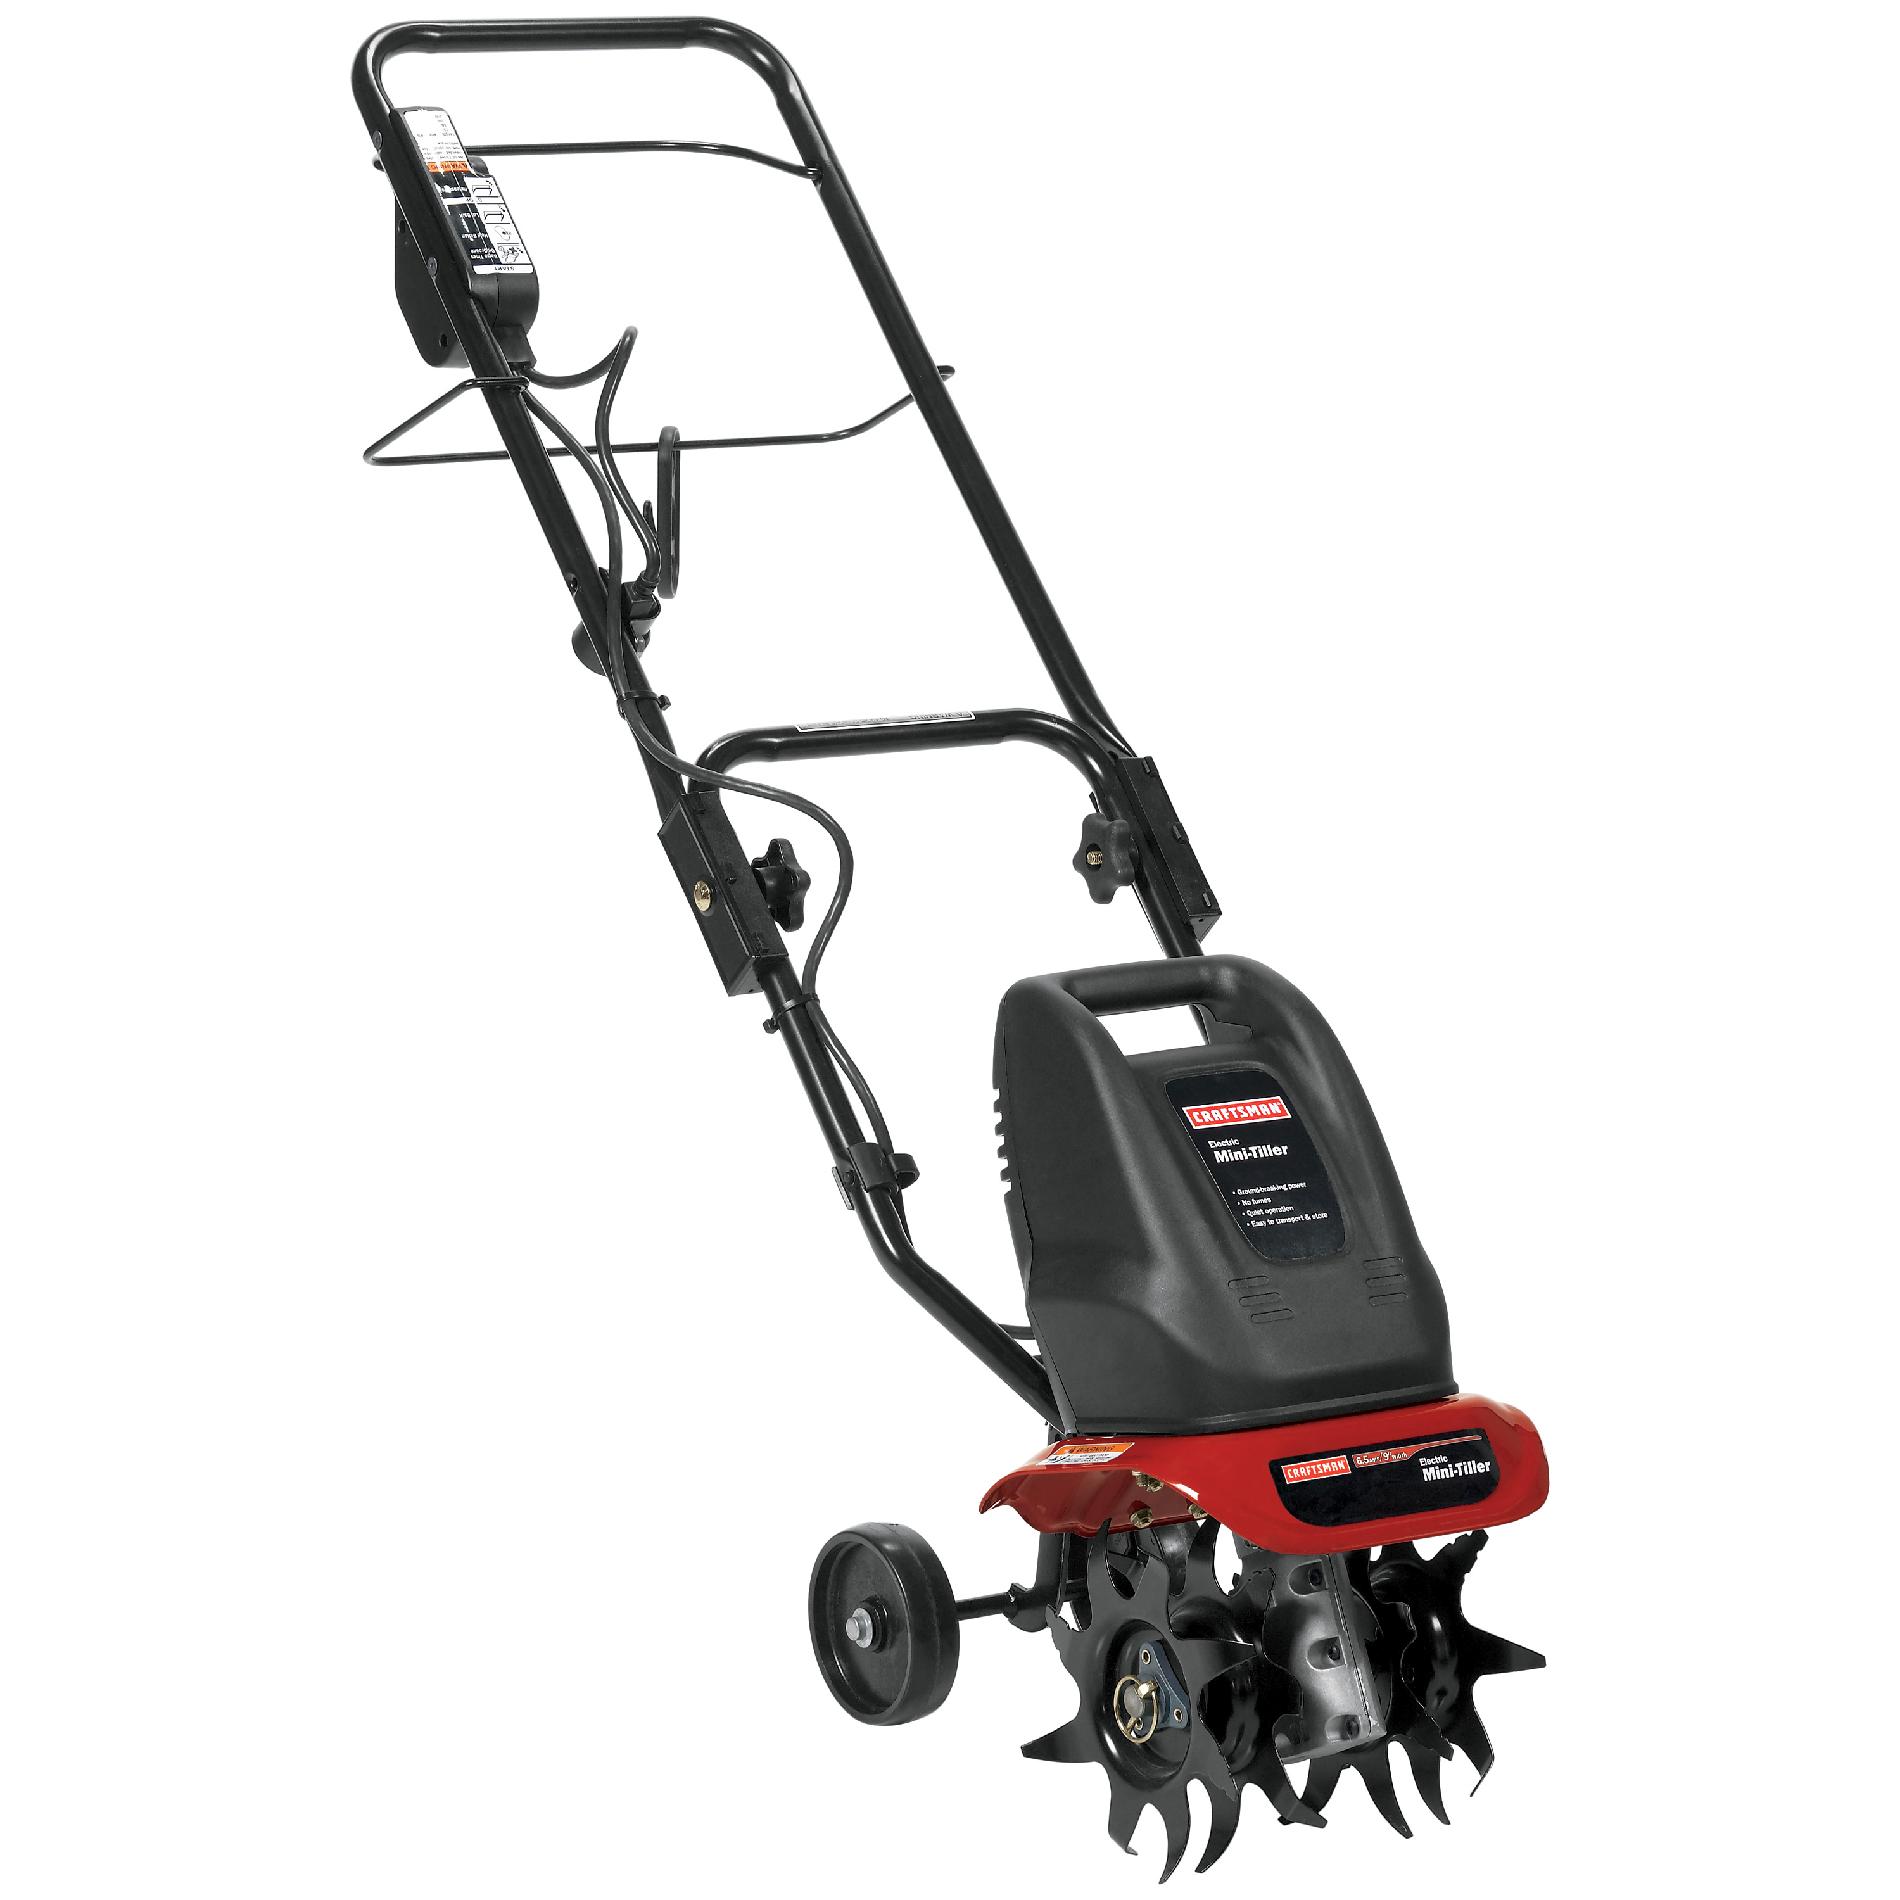 Craftsman Universal Mount Tiller Let Her Rip With Sears